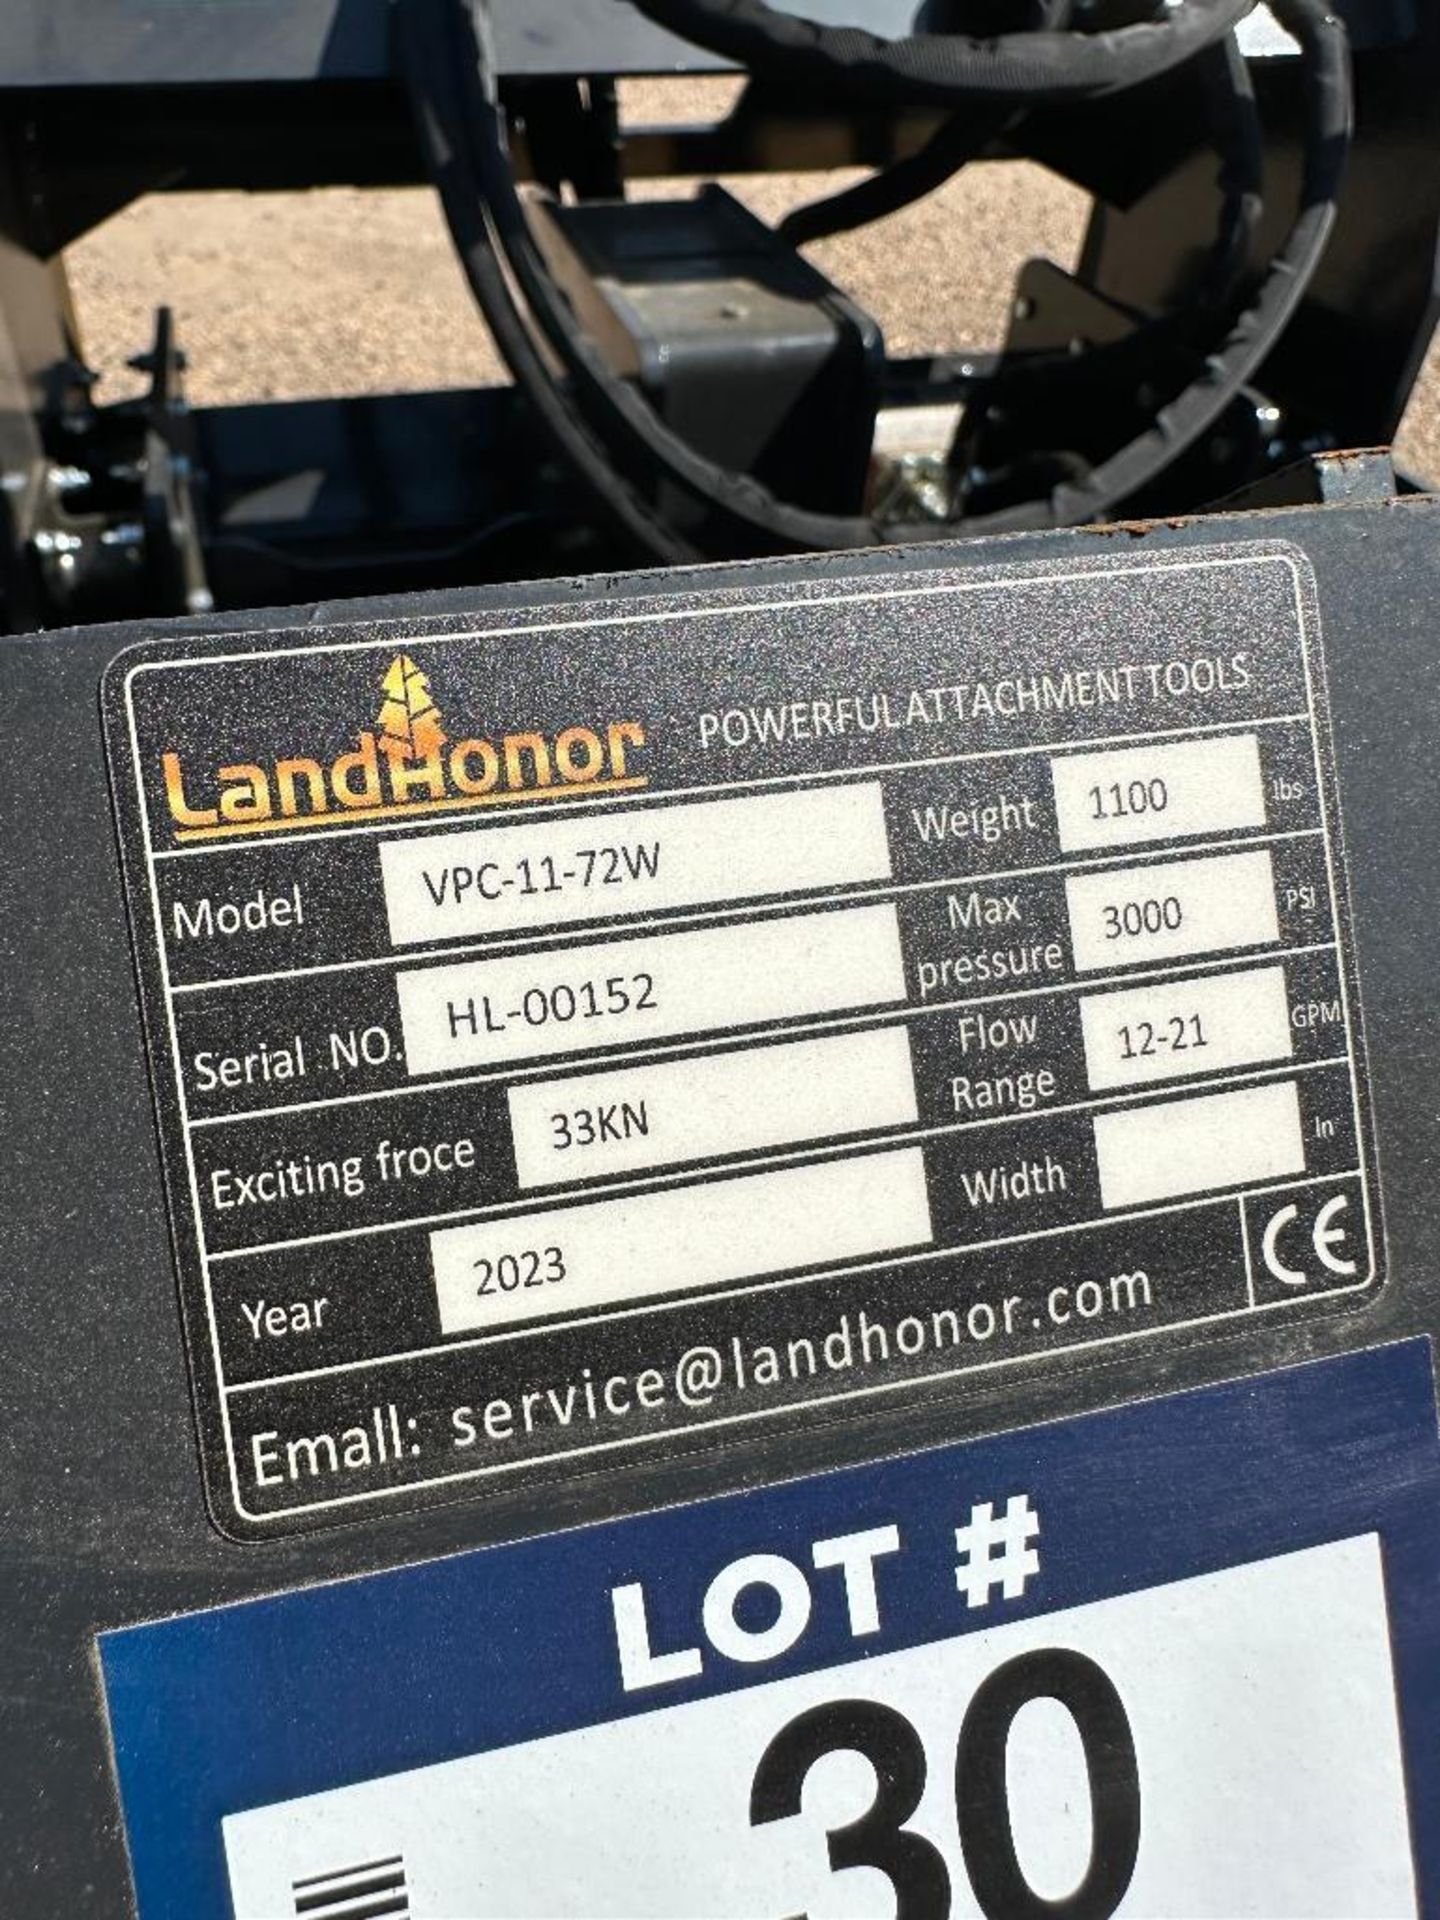 New 2023 Landhonor VPC-11-72W 72" Plate Compactor Skid Steer Attachment - Image 5 of 5